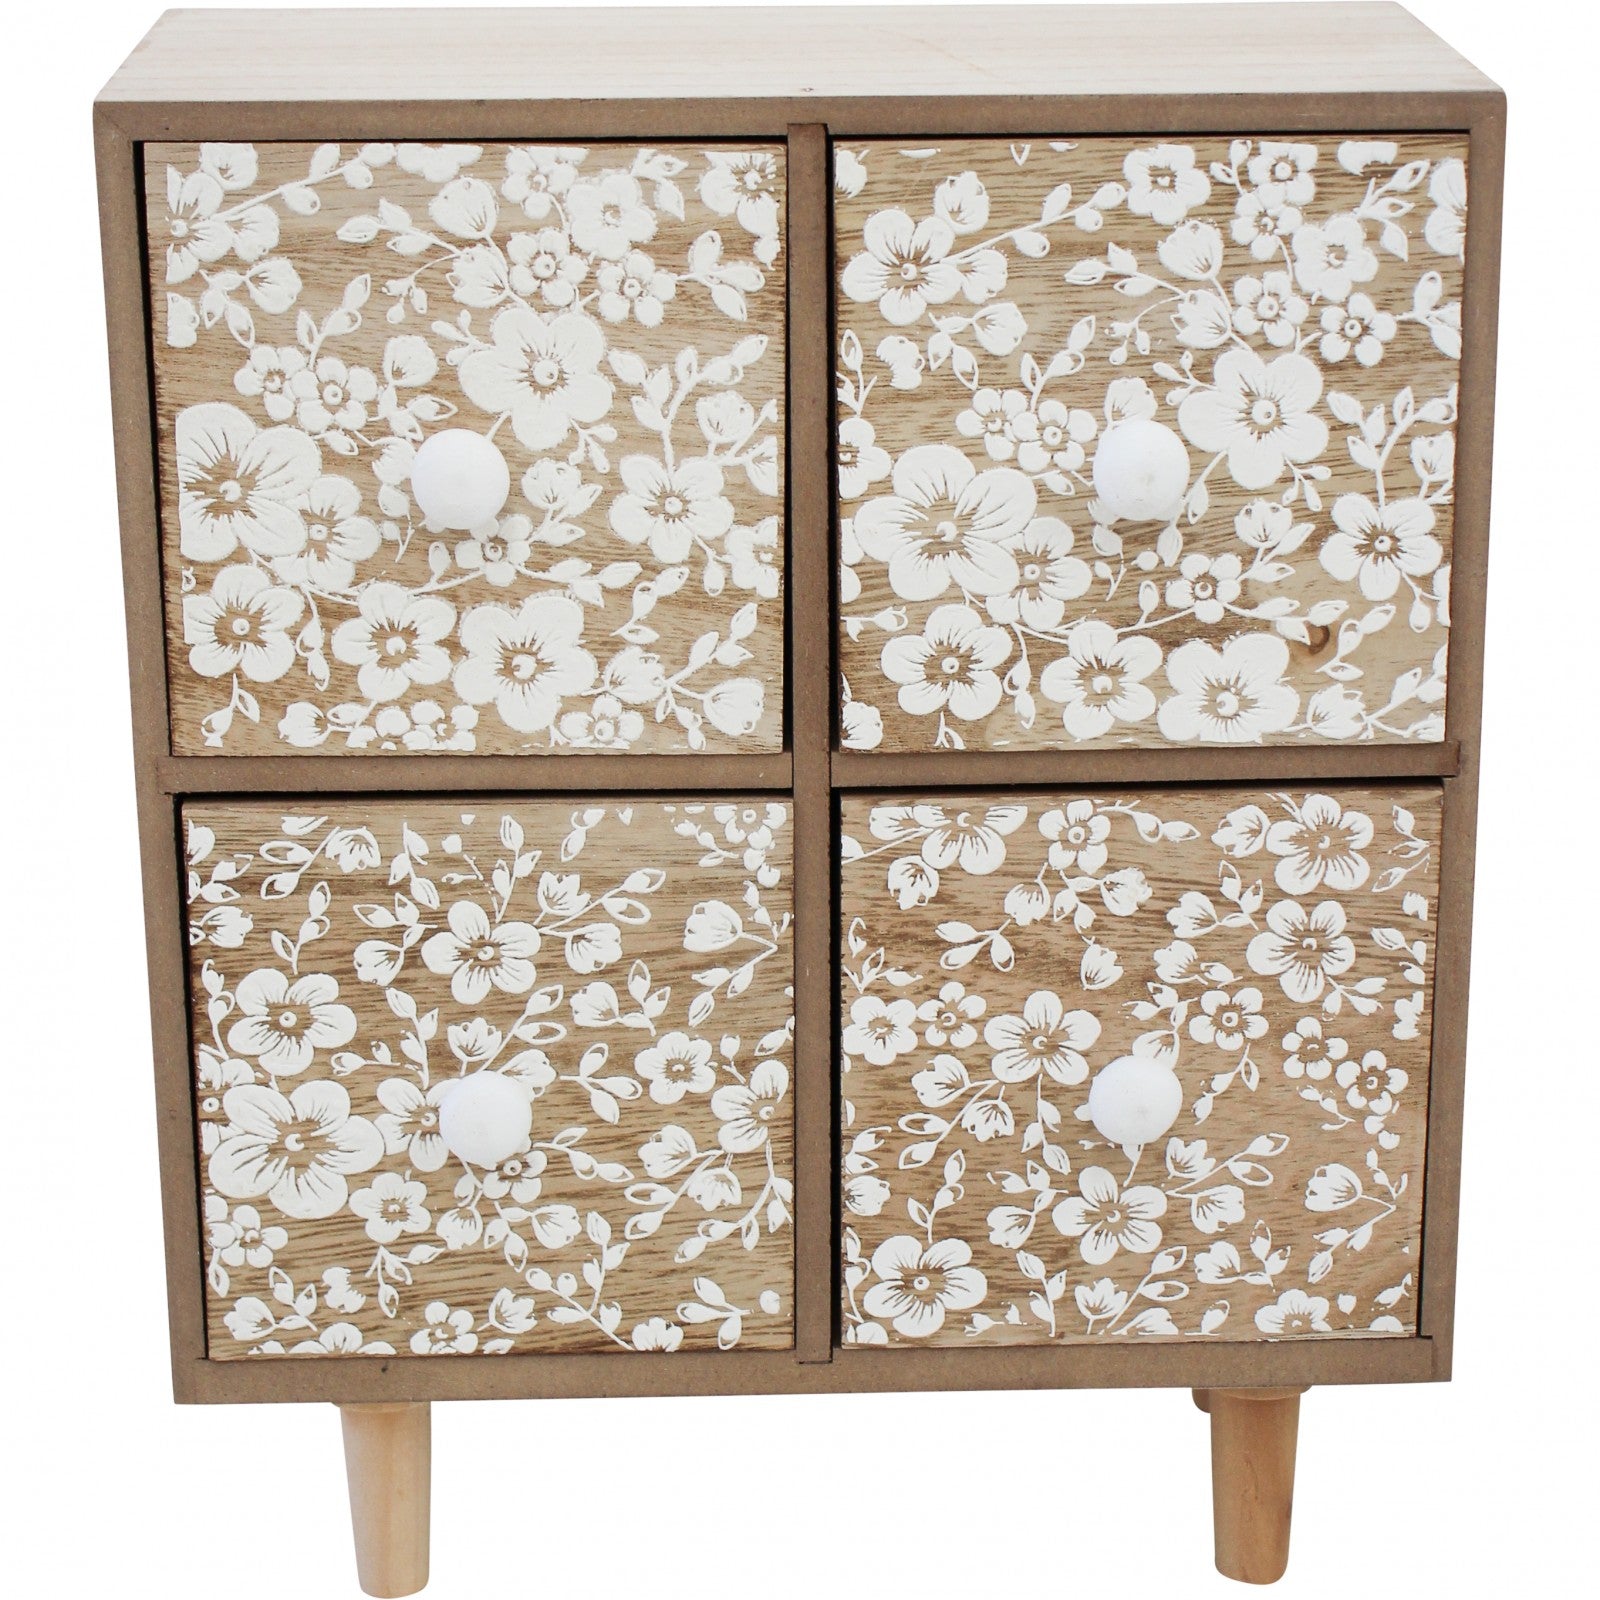 Floral Wooden Drawers